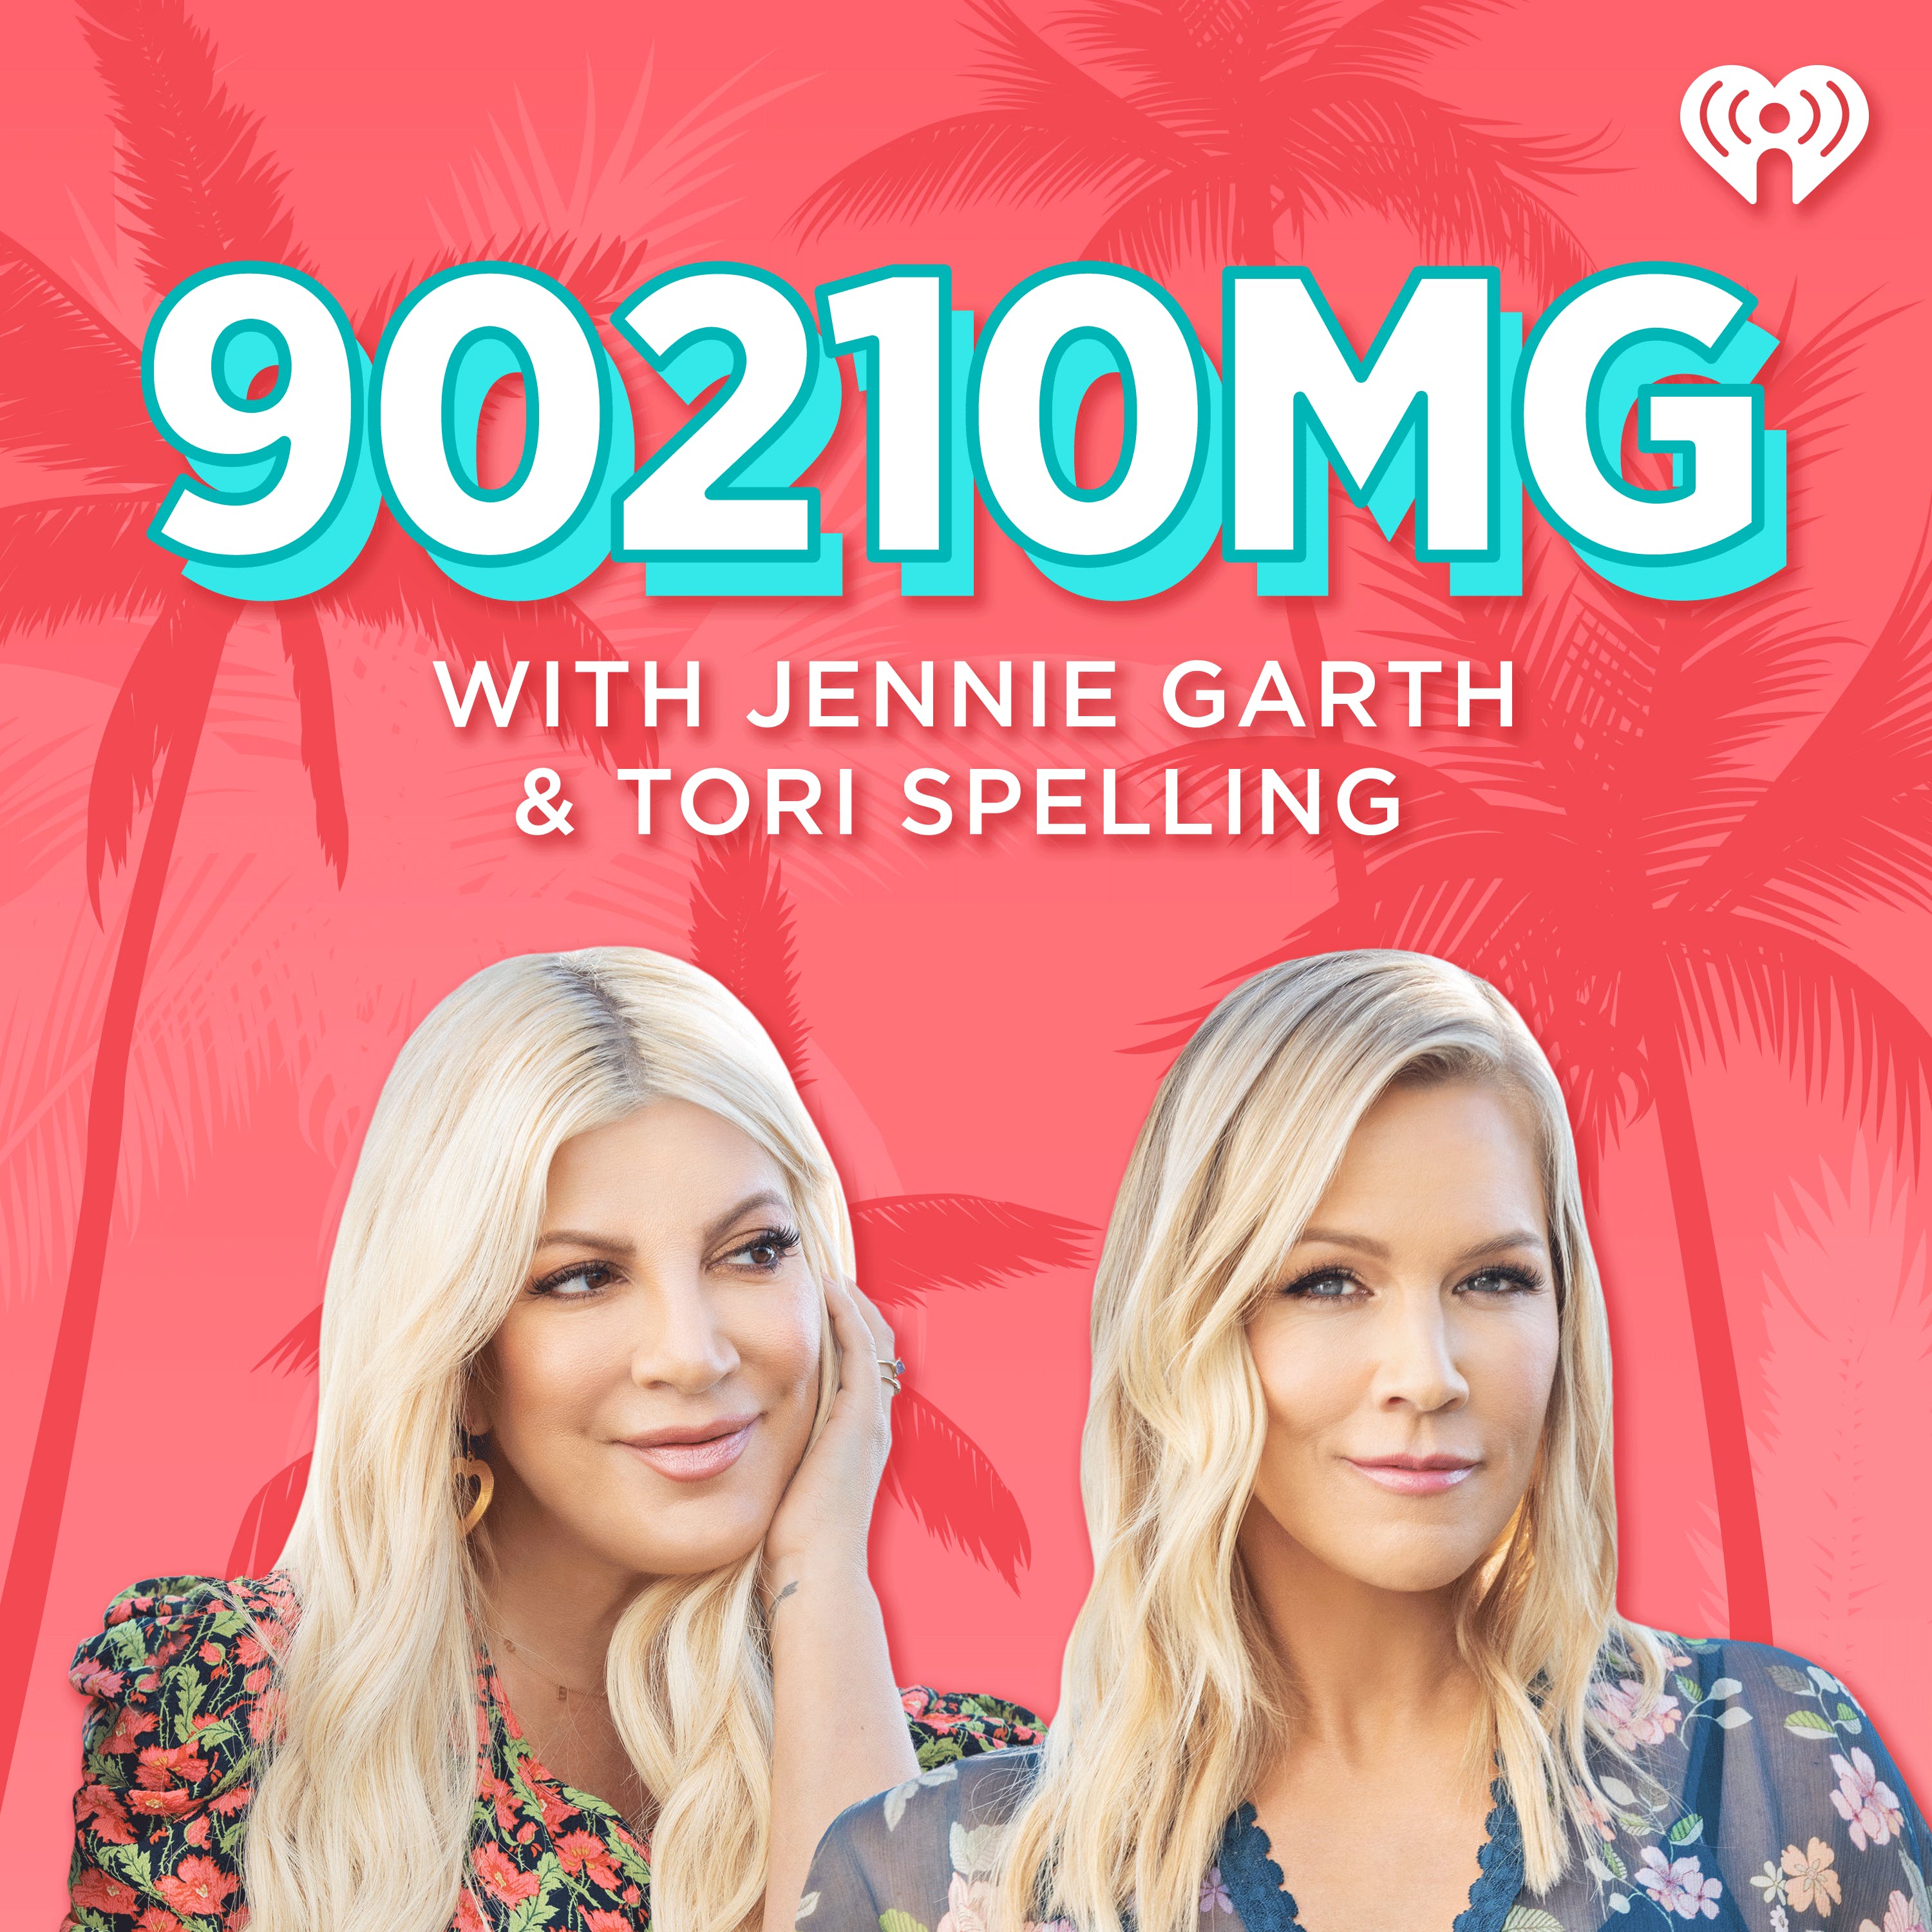 90210MG podcast show image